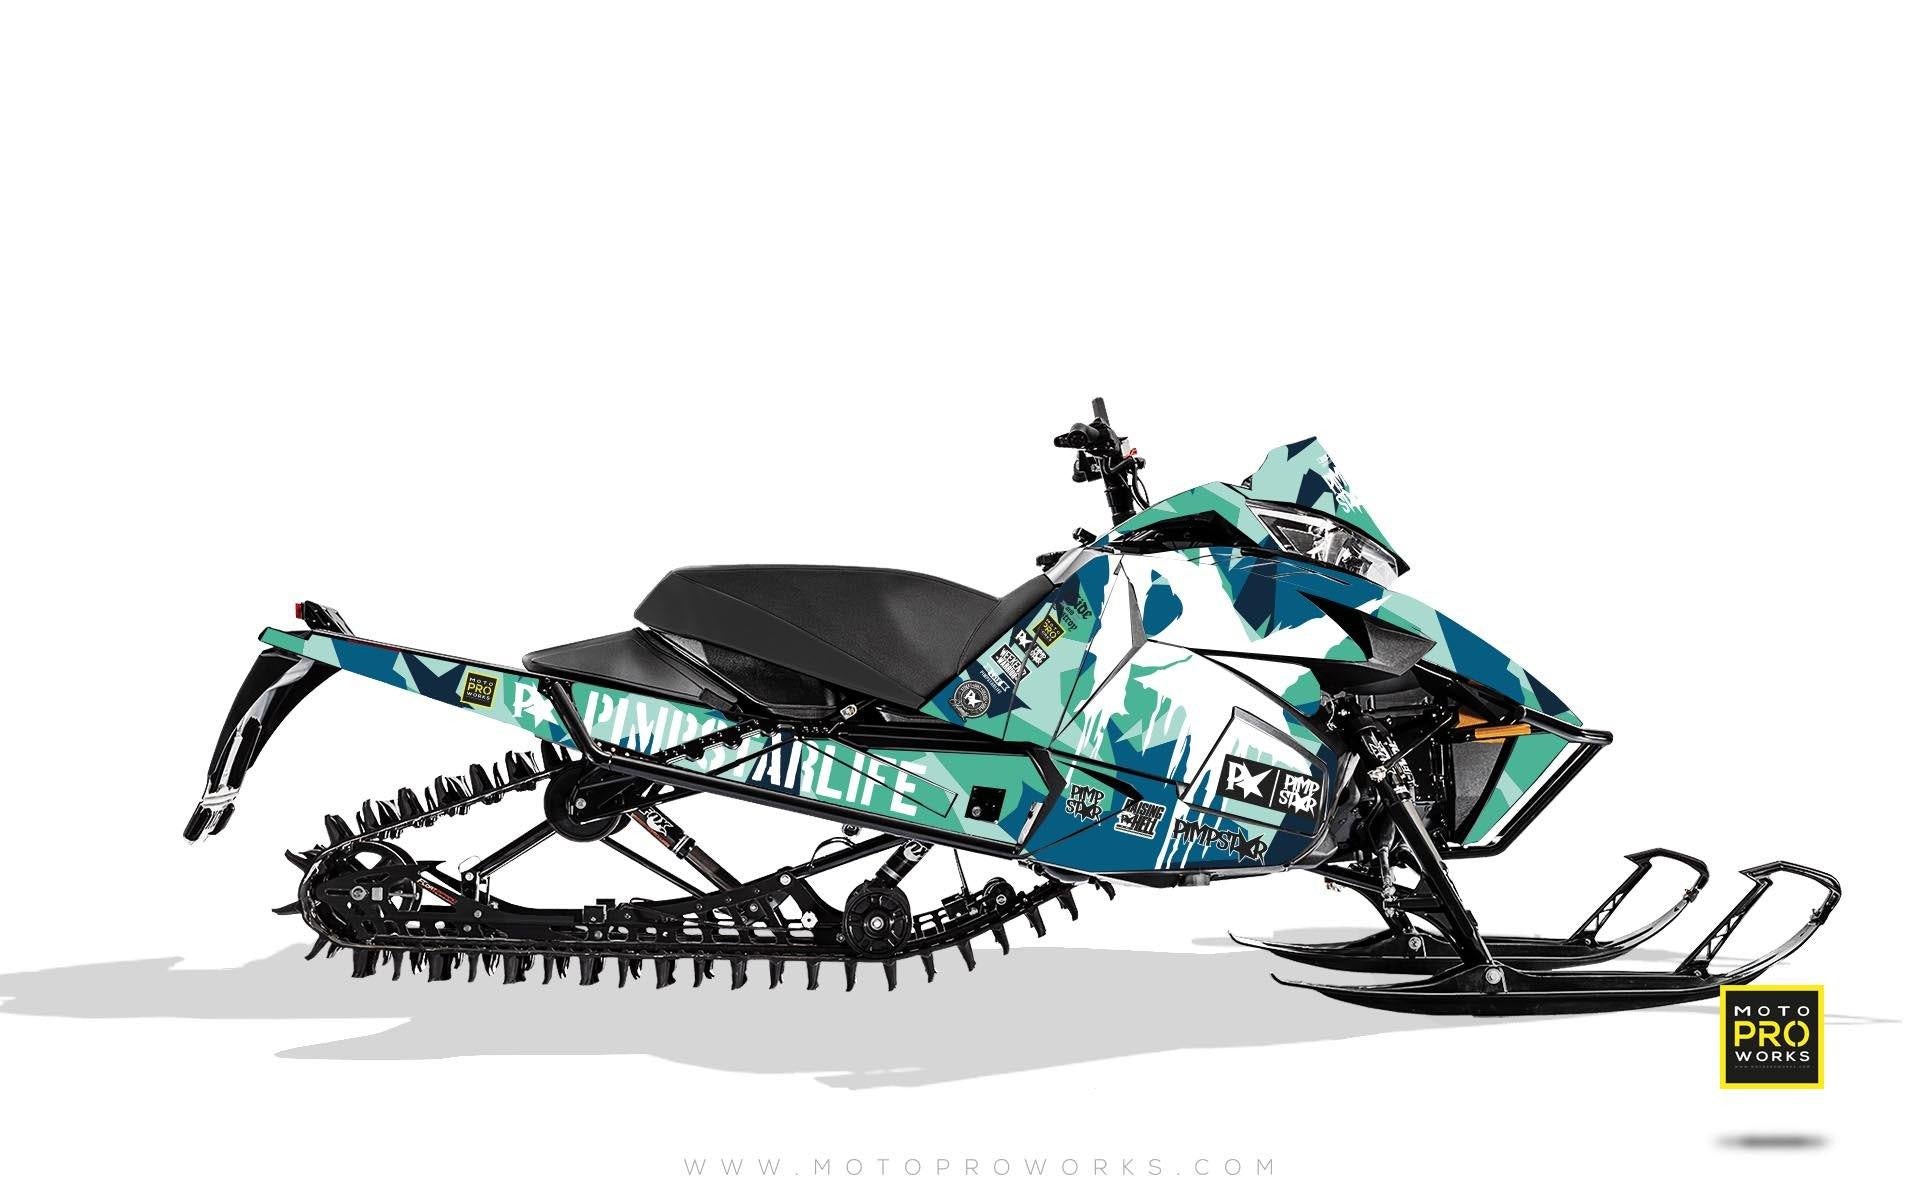 Arctic Cat Graphics - "M90" (turquoise) - MotoProWorks | Decals and Bike Graphic kit